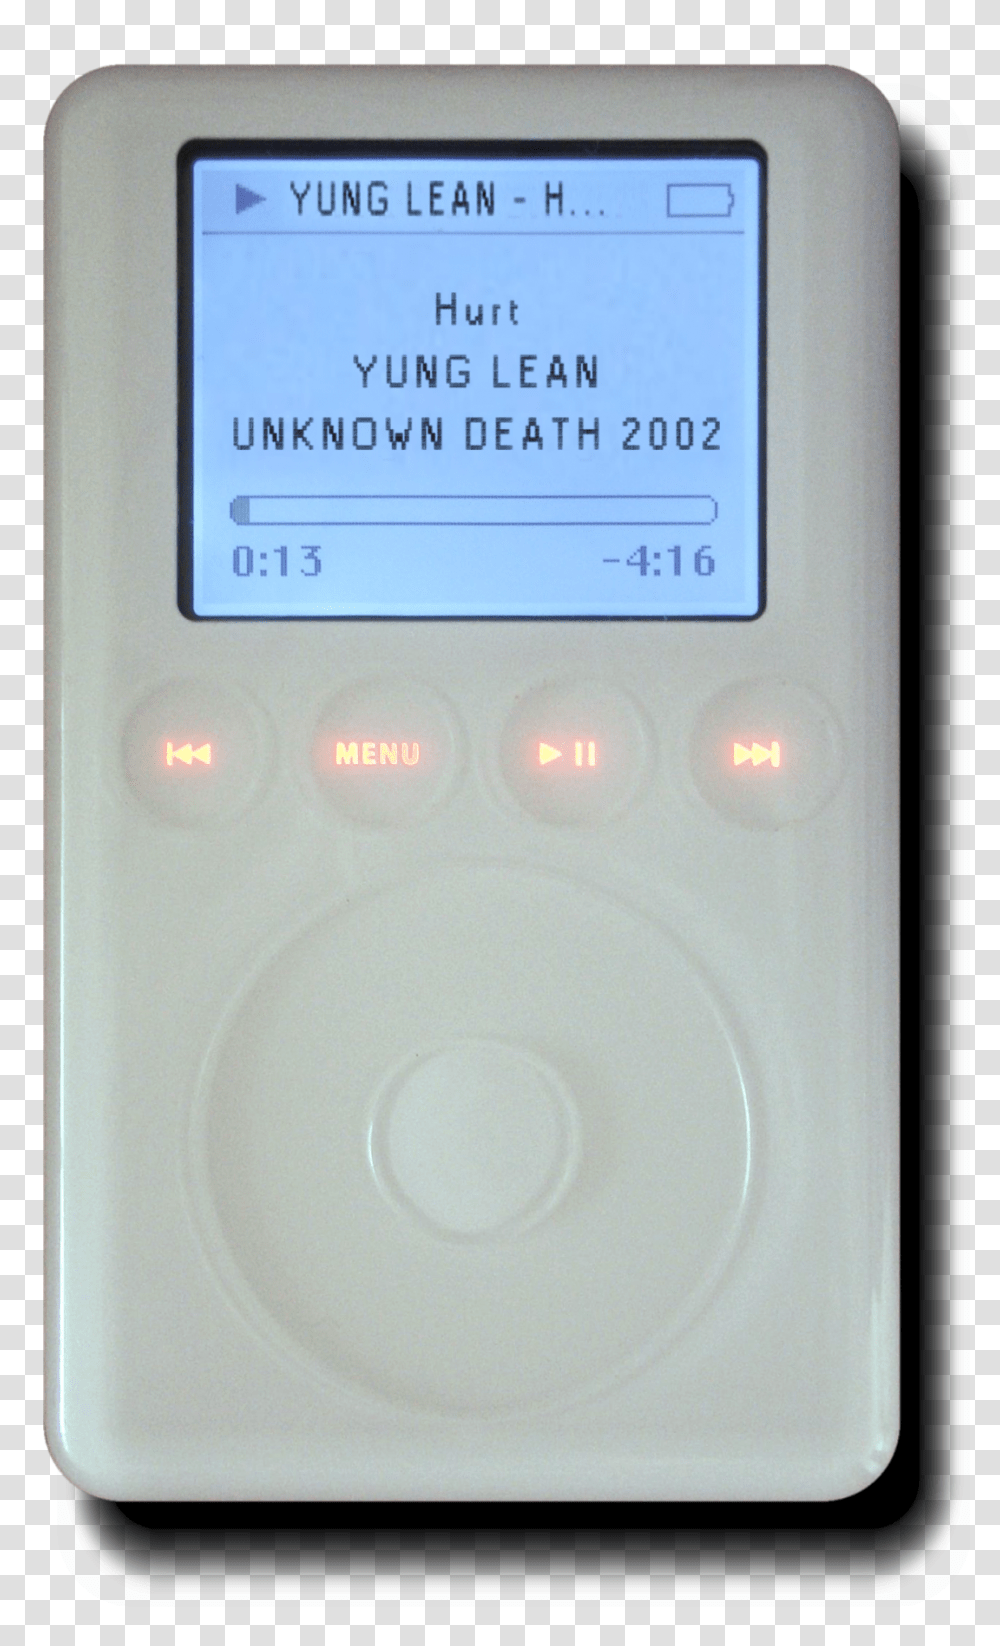 Sad Vintage Wow Lean Yung Sadboys Unknowndeath2002 Ipod With Four Buttons, Mobile Phone, Electronics, Cell Phone, Word Transparent Png